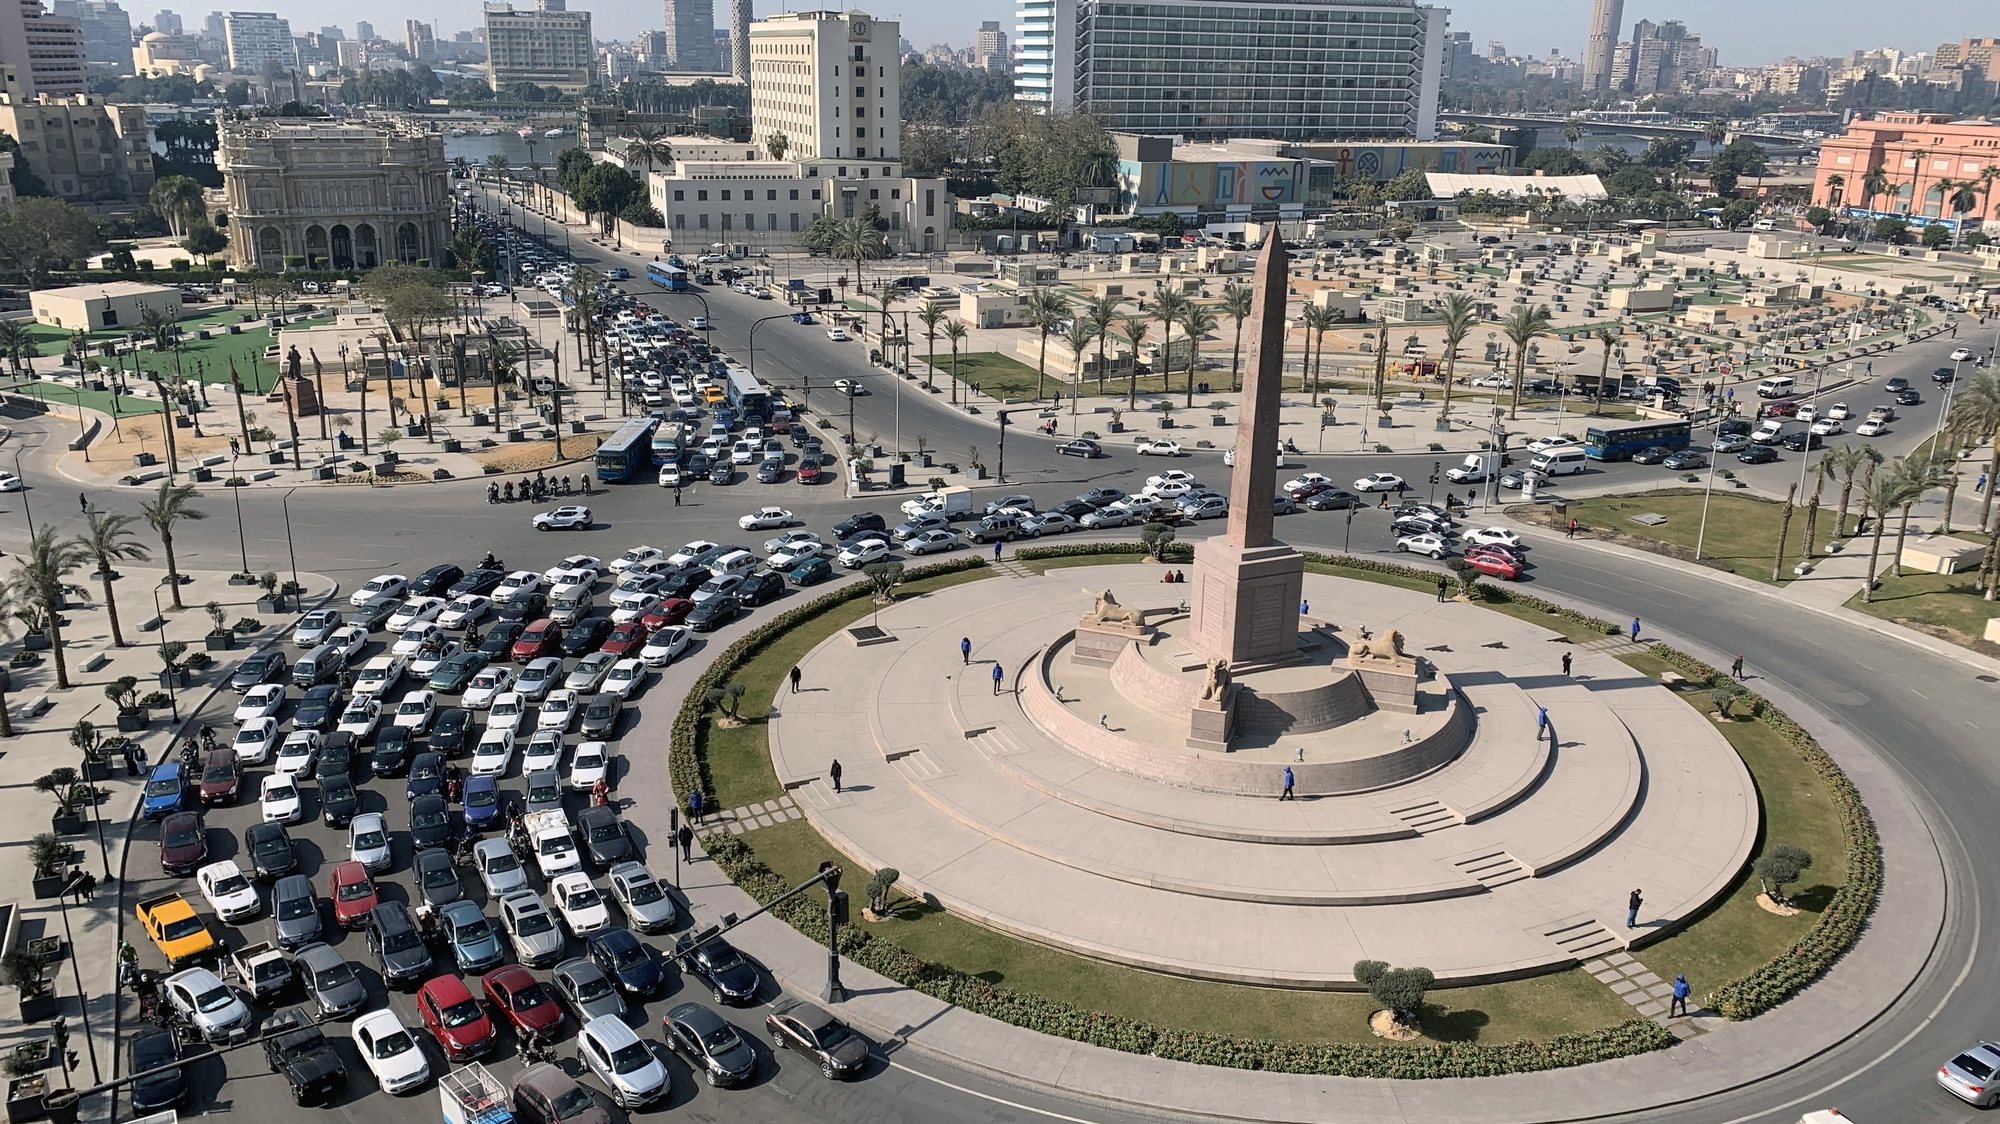 epa09708153 A general view of the obelisk at the center of the Tahrir Square, Cairo, Egypt, 25 January 2022. Egypt on 25 January 2022 marks the 11th anniversary of the 2011 uprising against then-president Hosni Mubarak.  EPA/KHALED ELFIQI